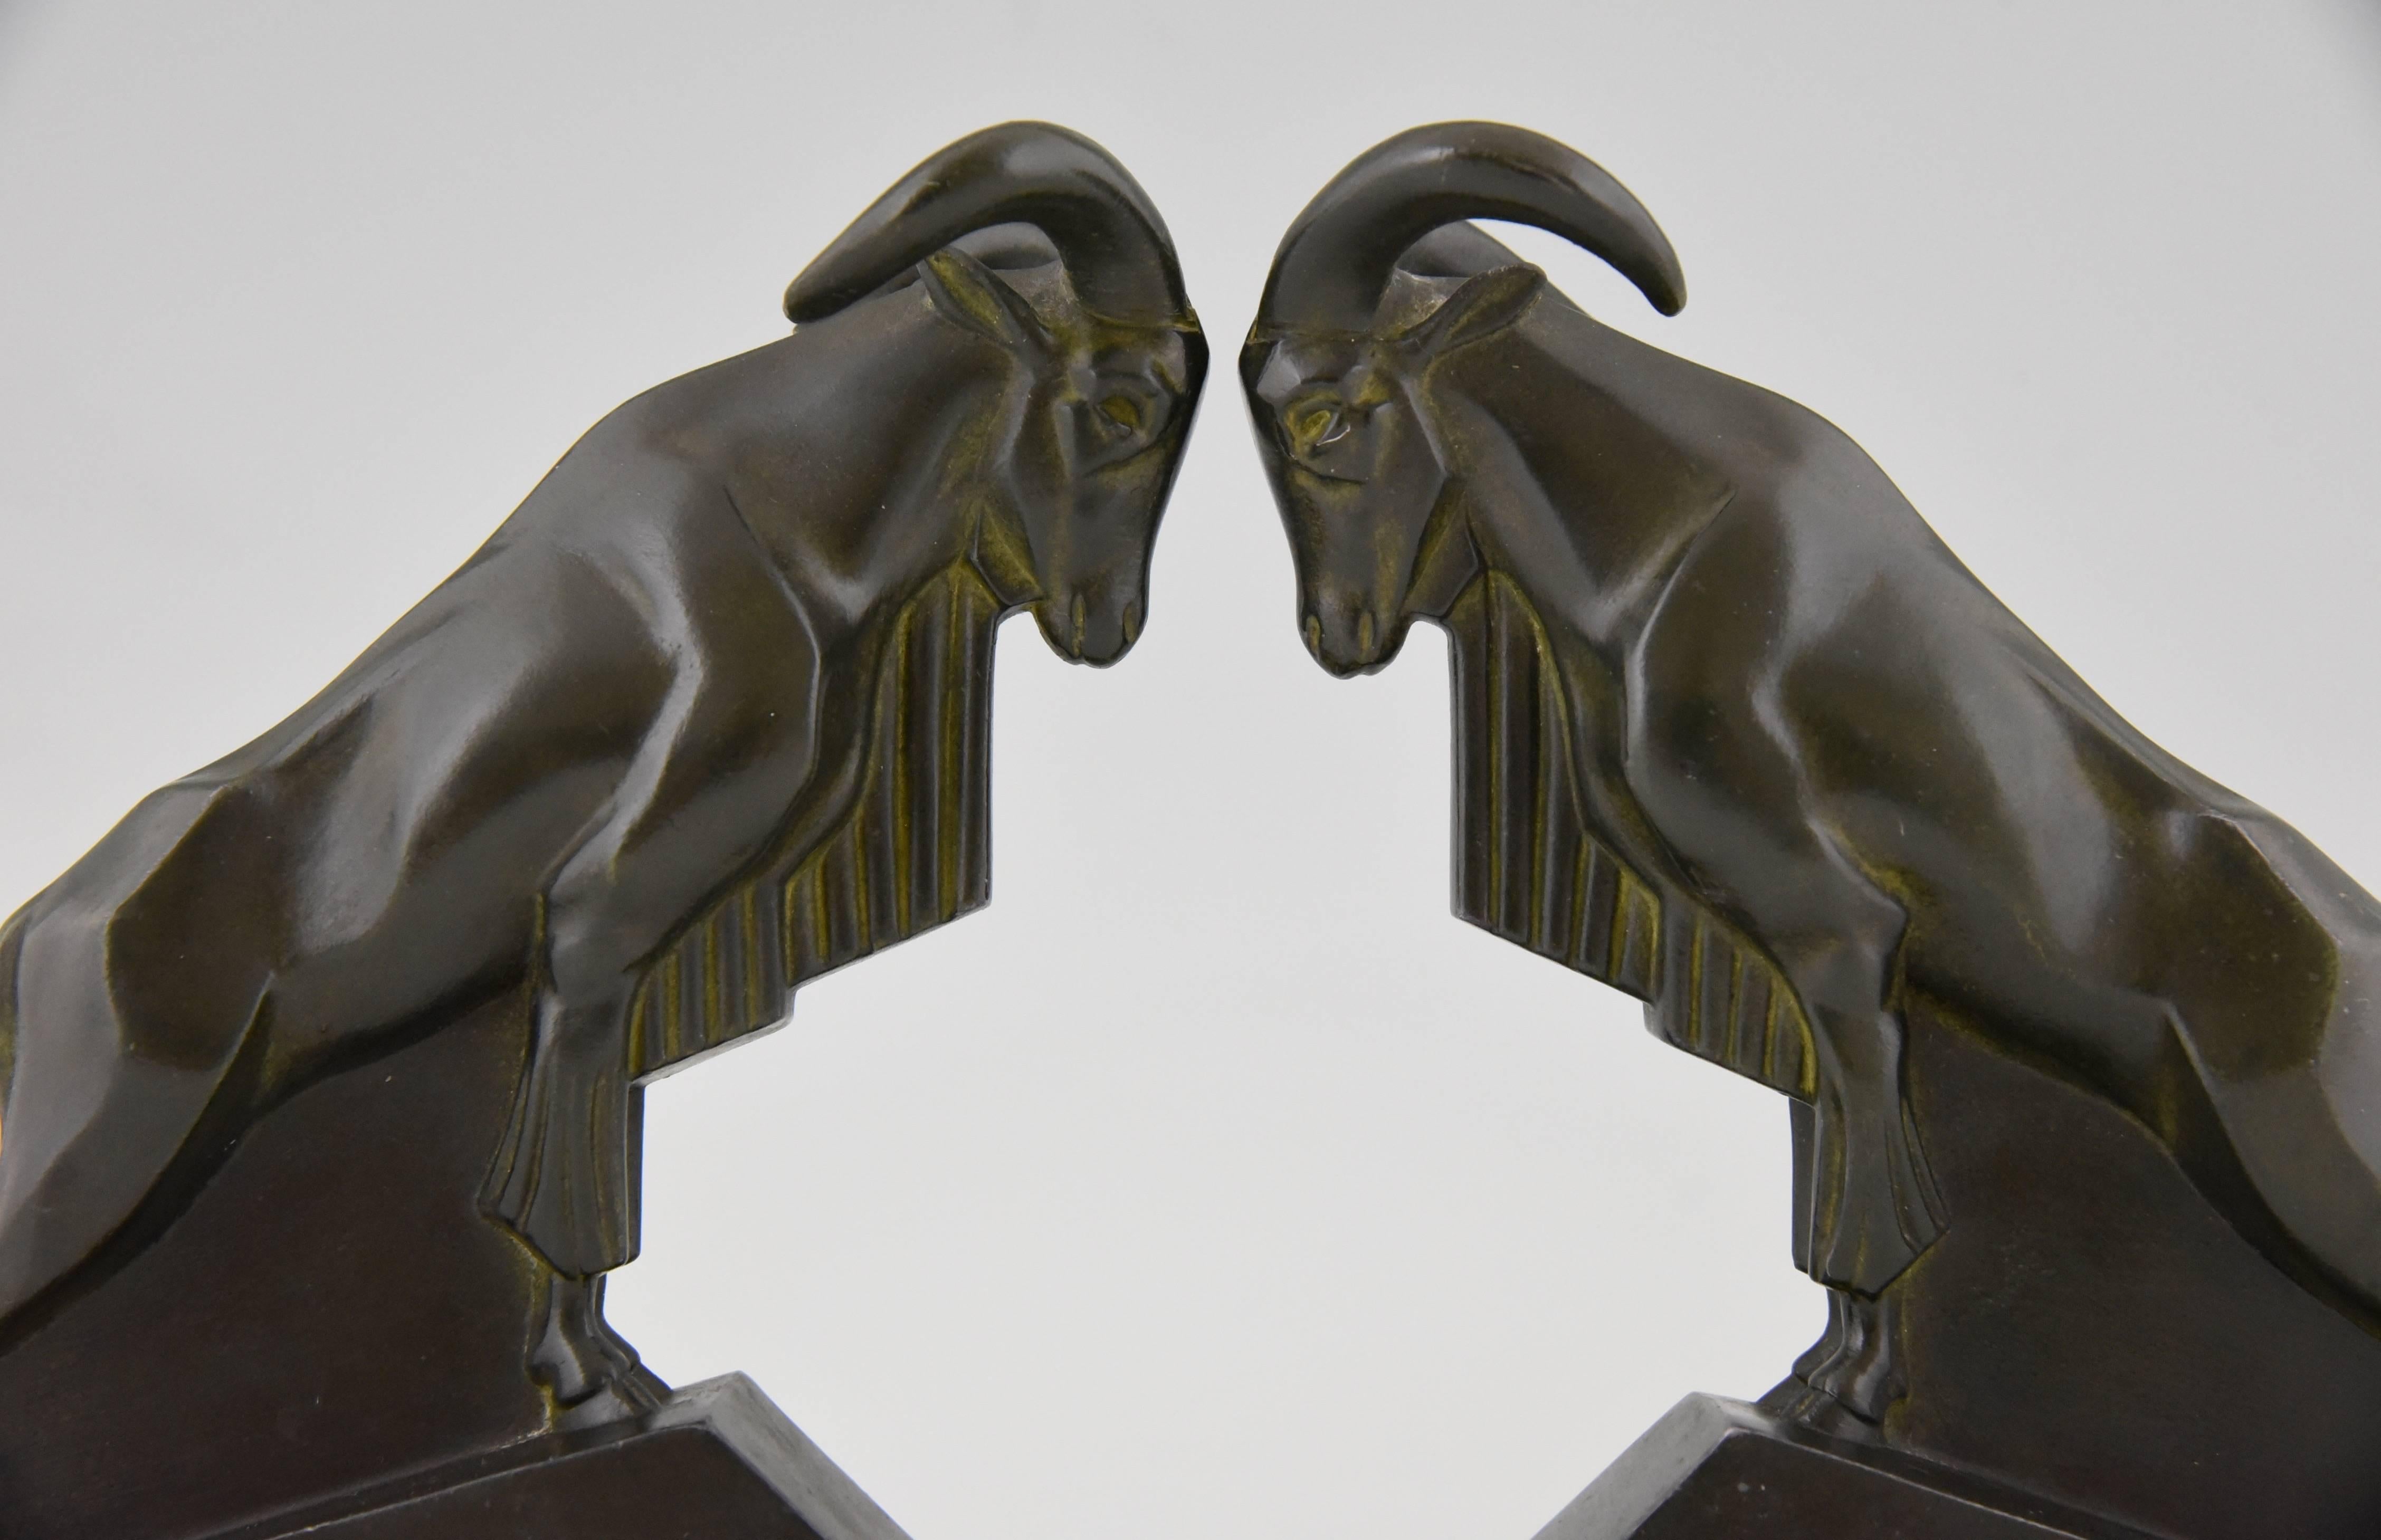 Patinated French Art Deco Ram Bookends by Max Le Verrier, 1930